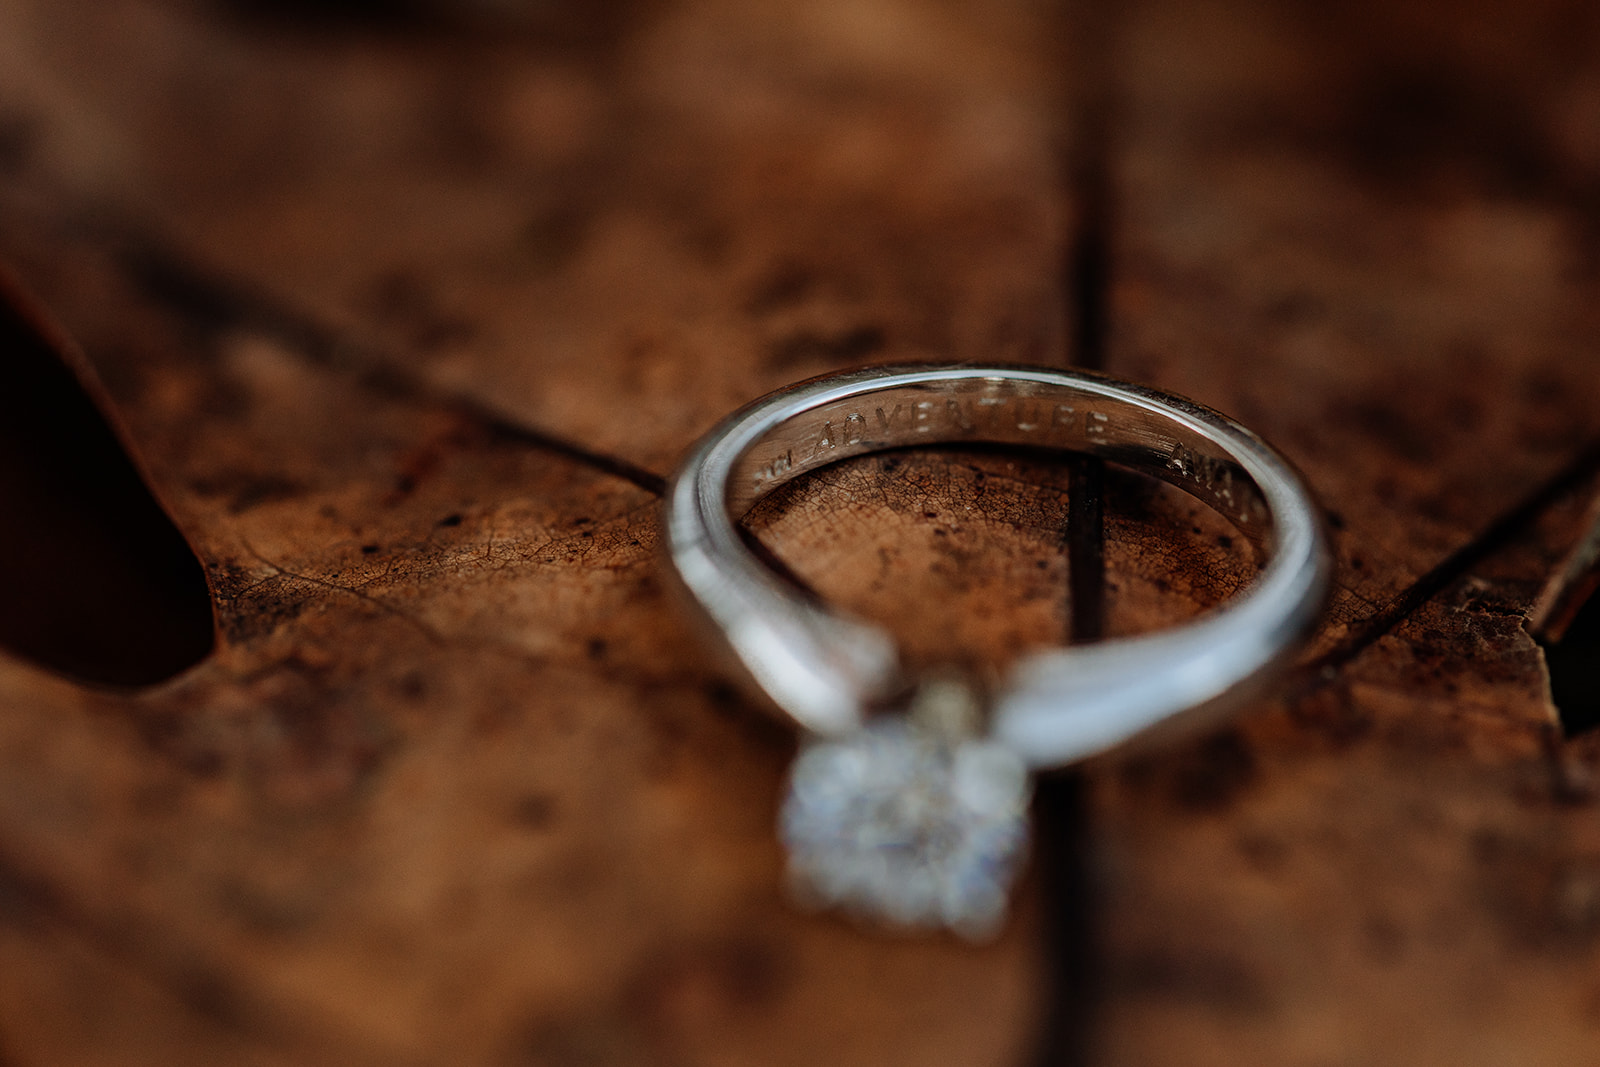 How to Take Stunning Engagement Ring Photos (Step-By-Step Guide) – Formed From Light